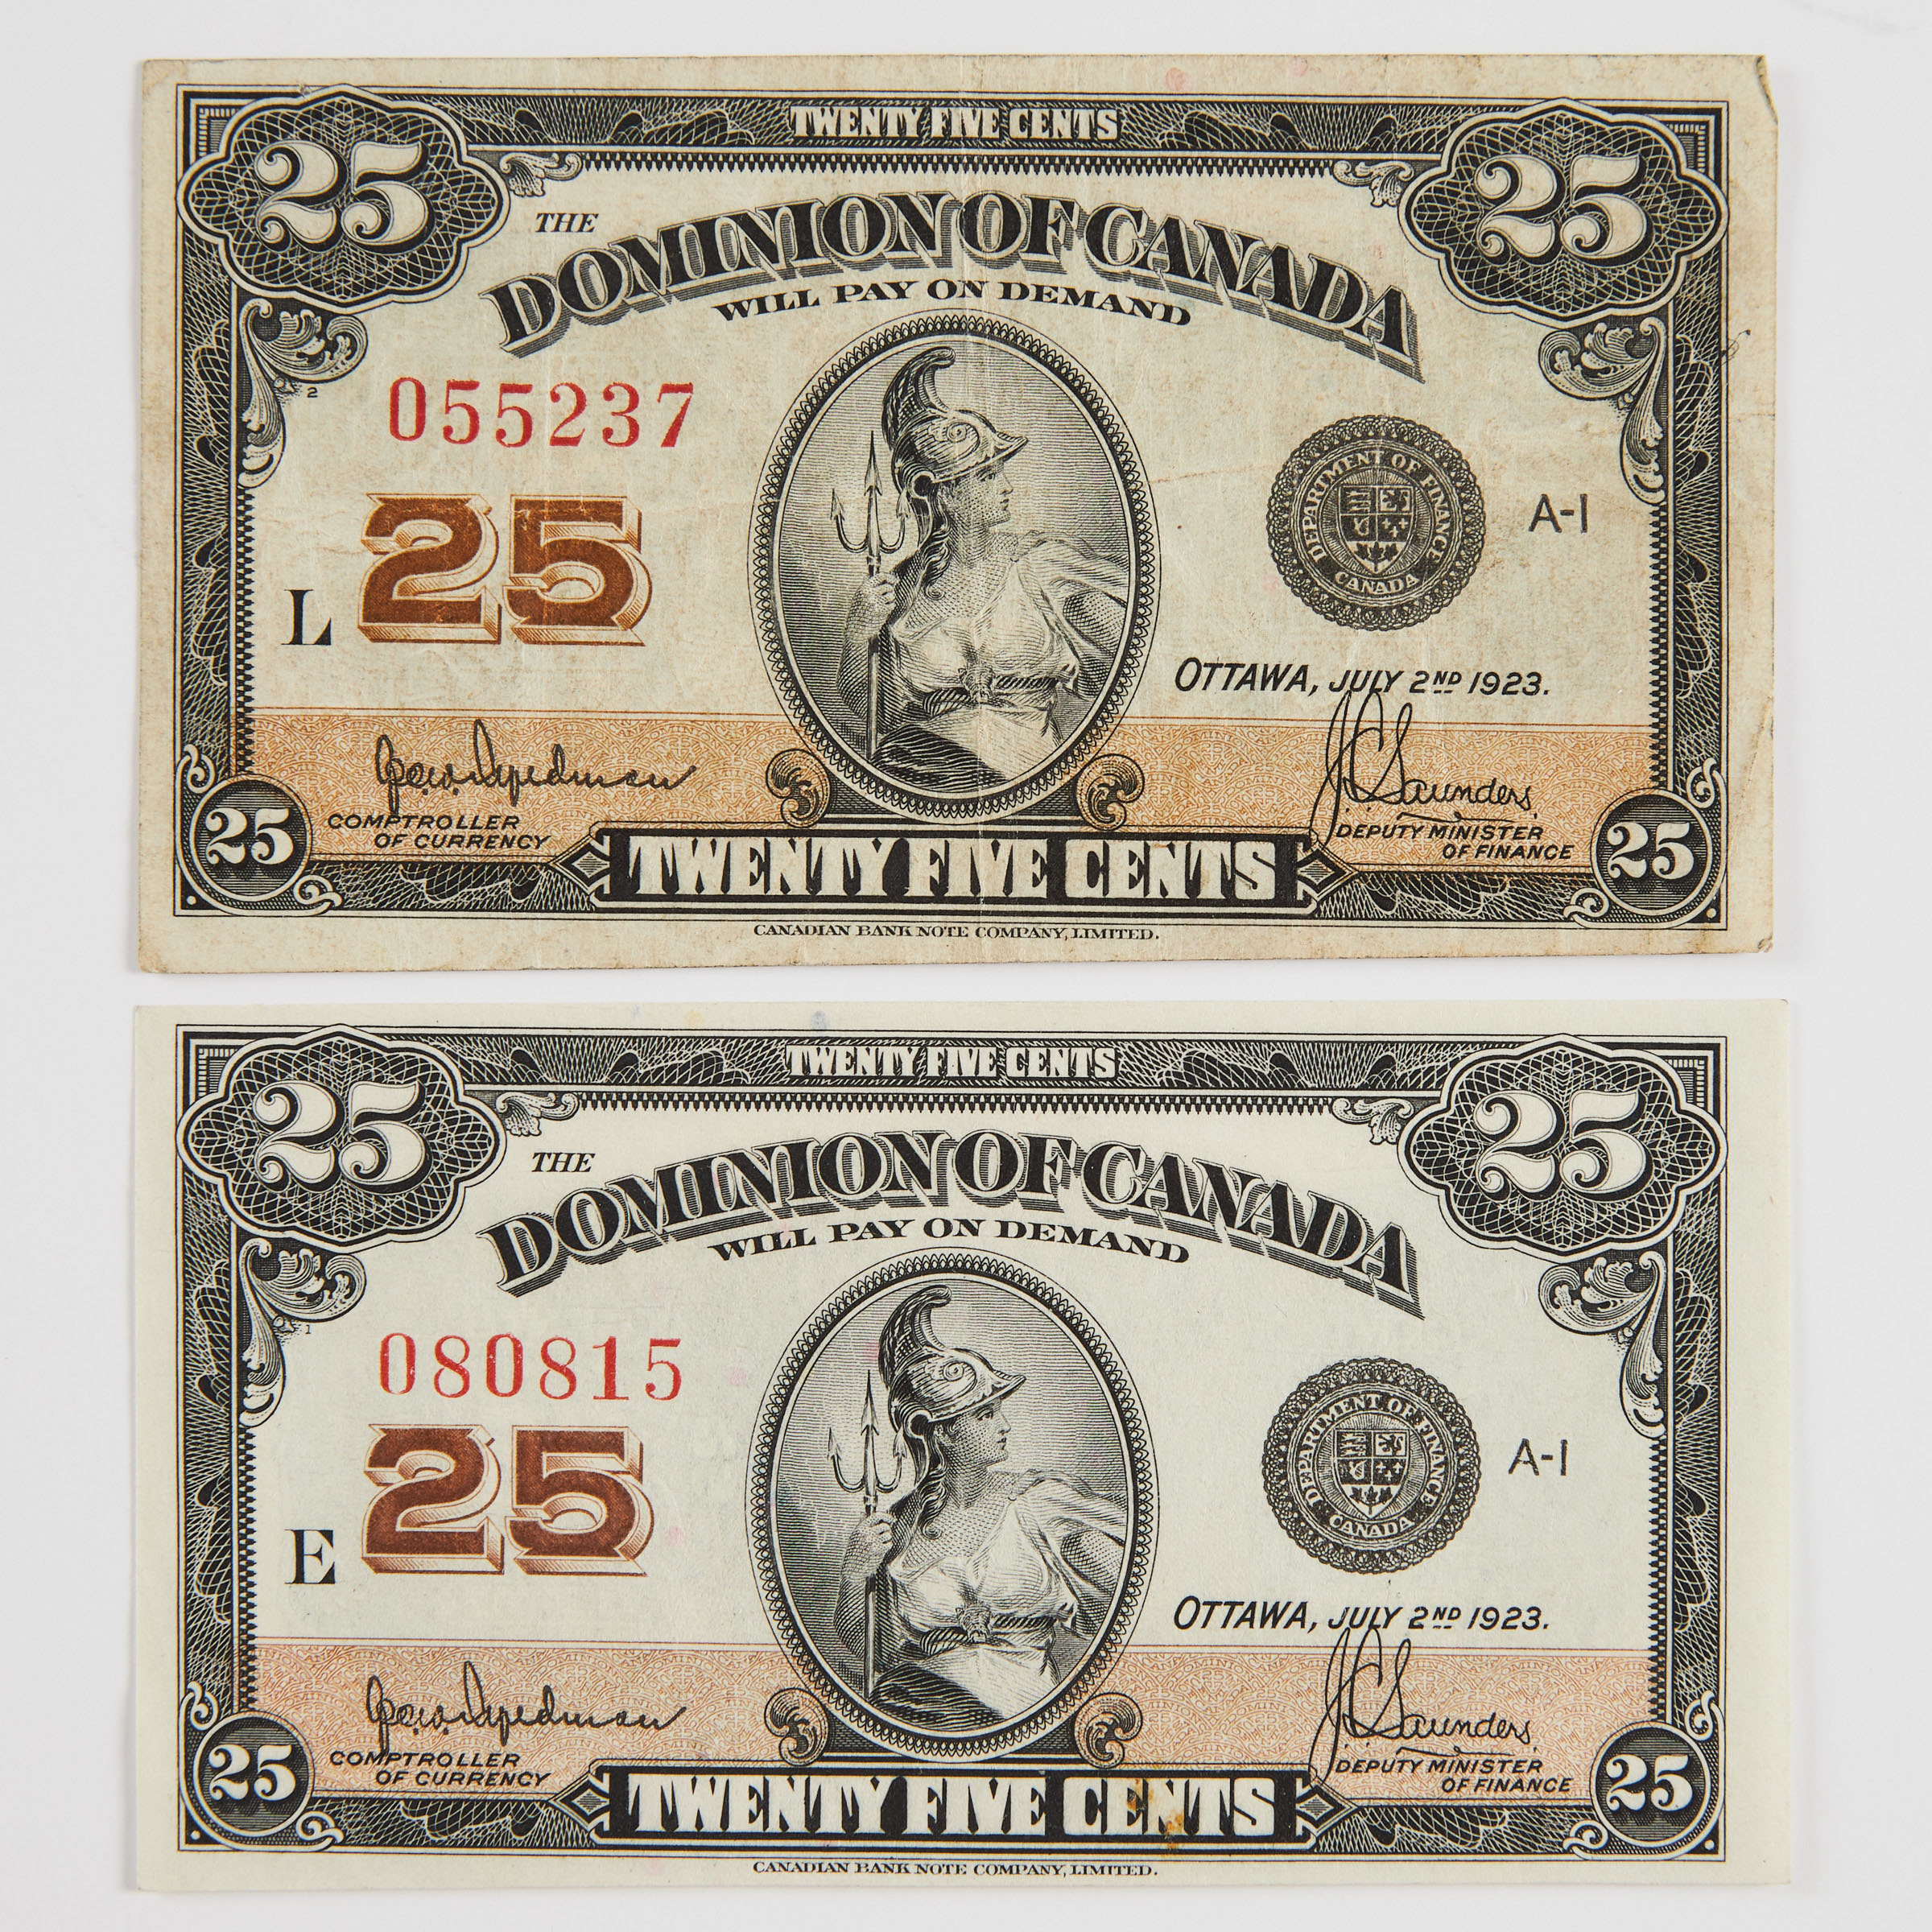 Two Dominion Of Canada 1923 25 Cent Bank Notes (Shinplasters)